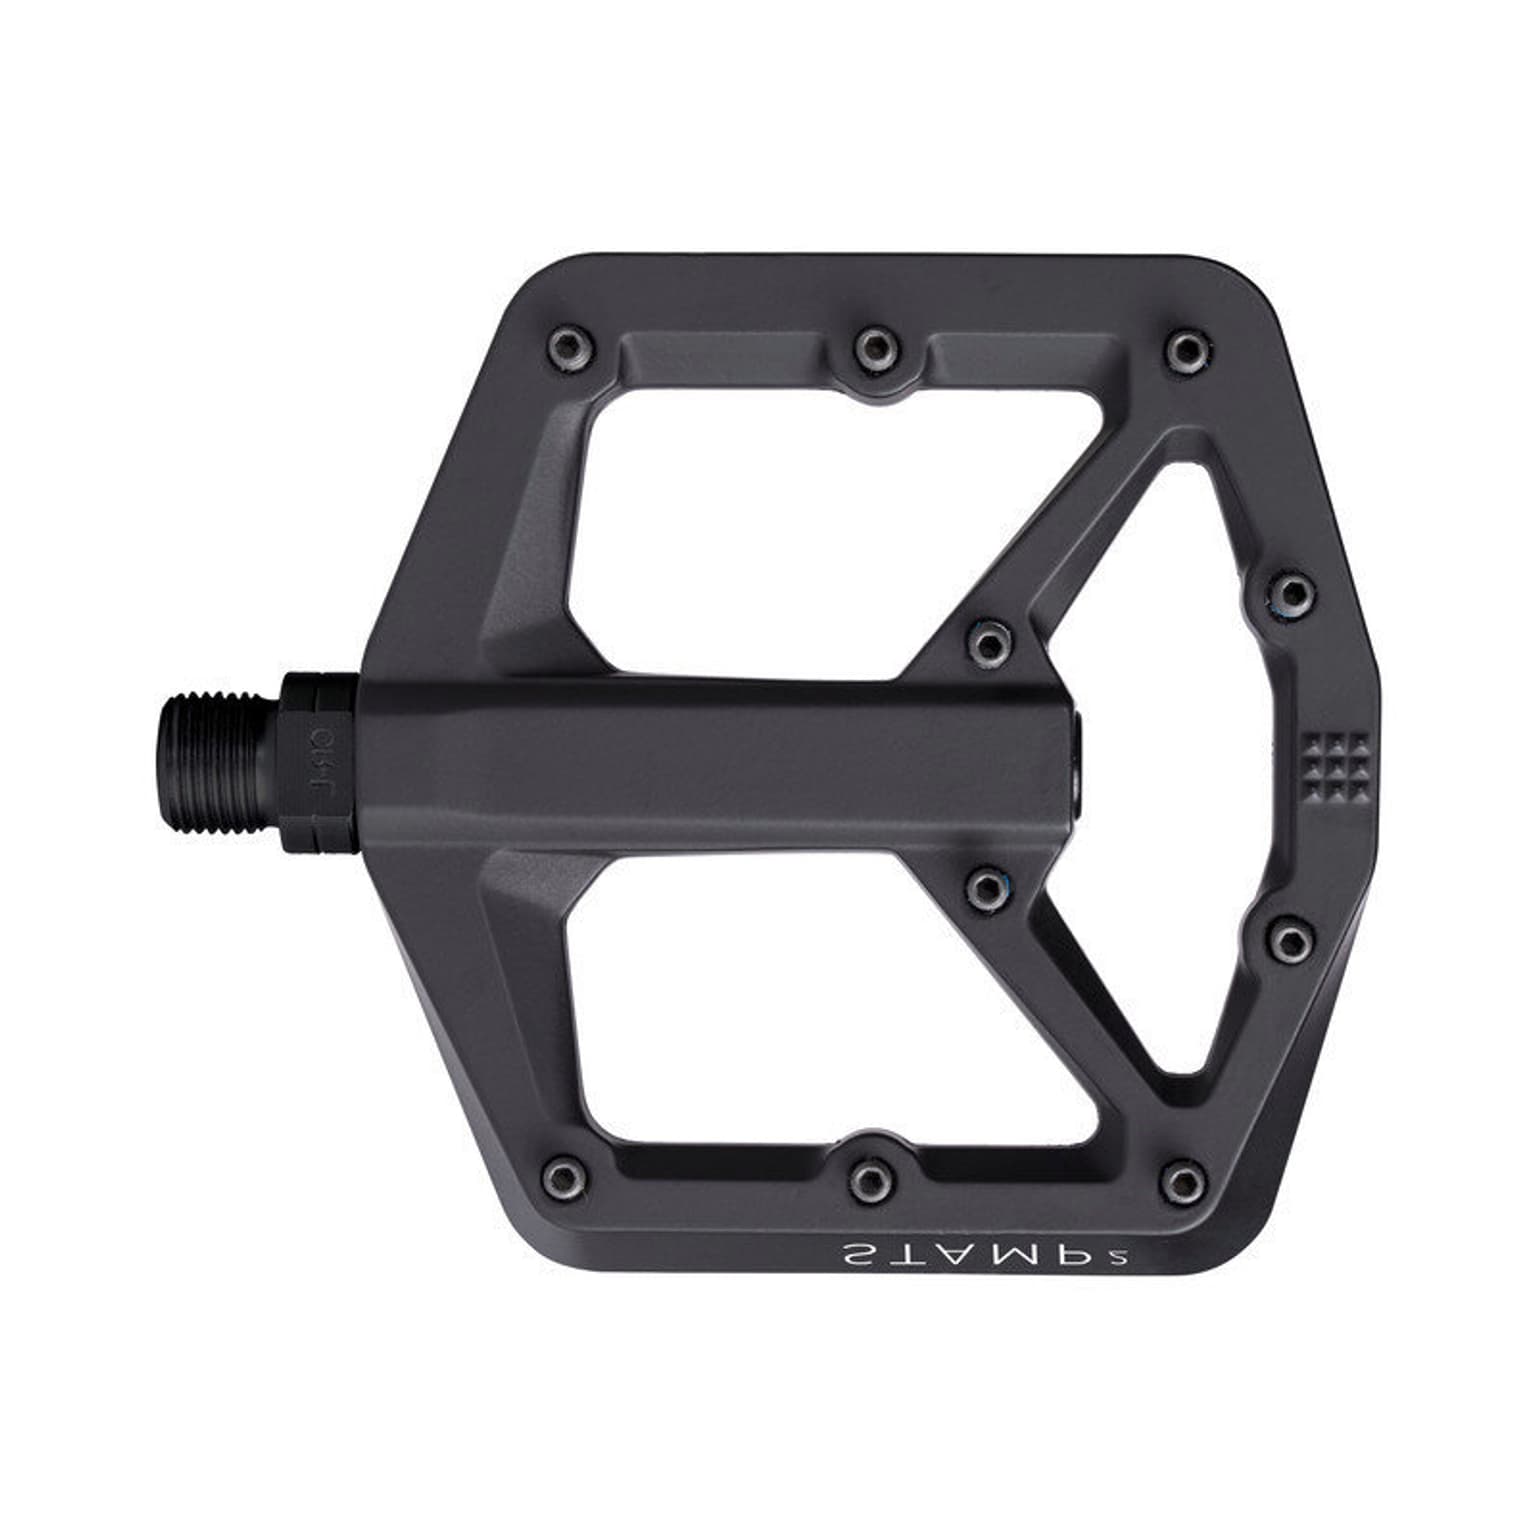 crankbrothers crankbrothers Pedal Stamp 2 small Pedale 1